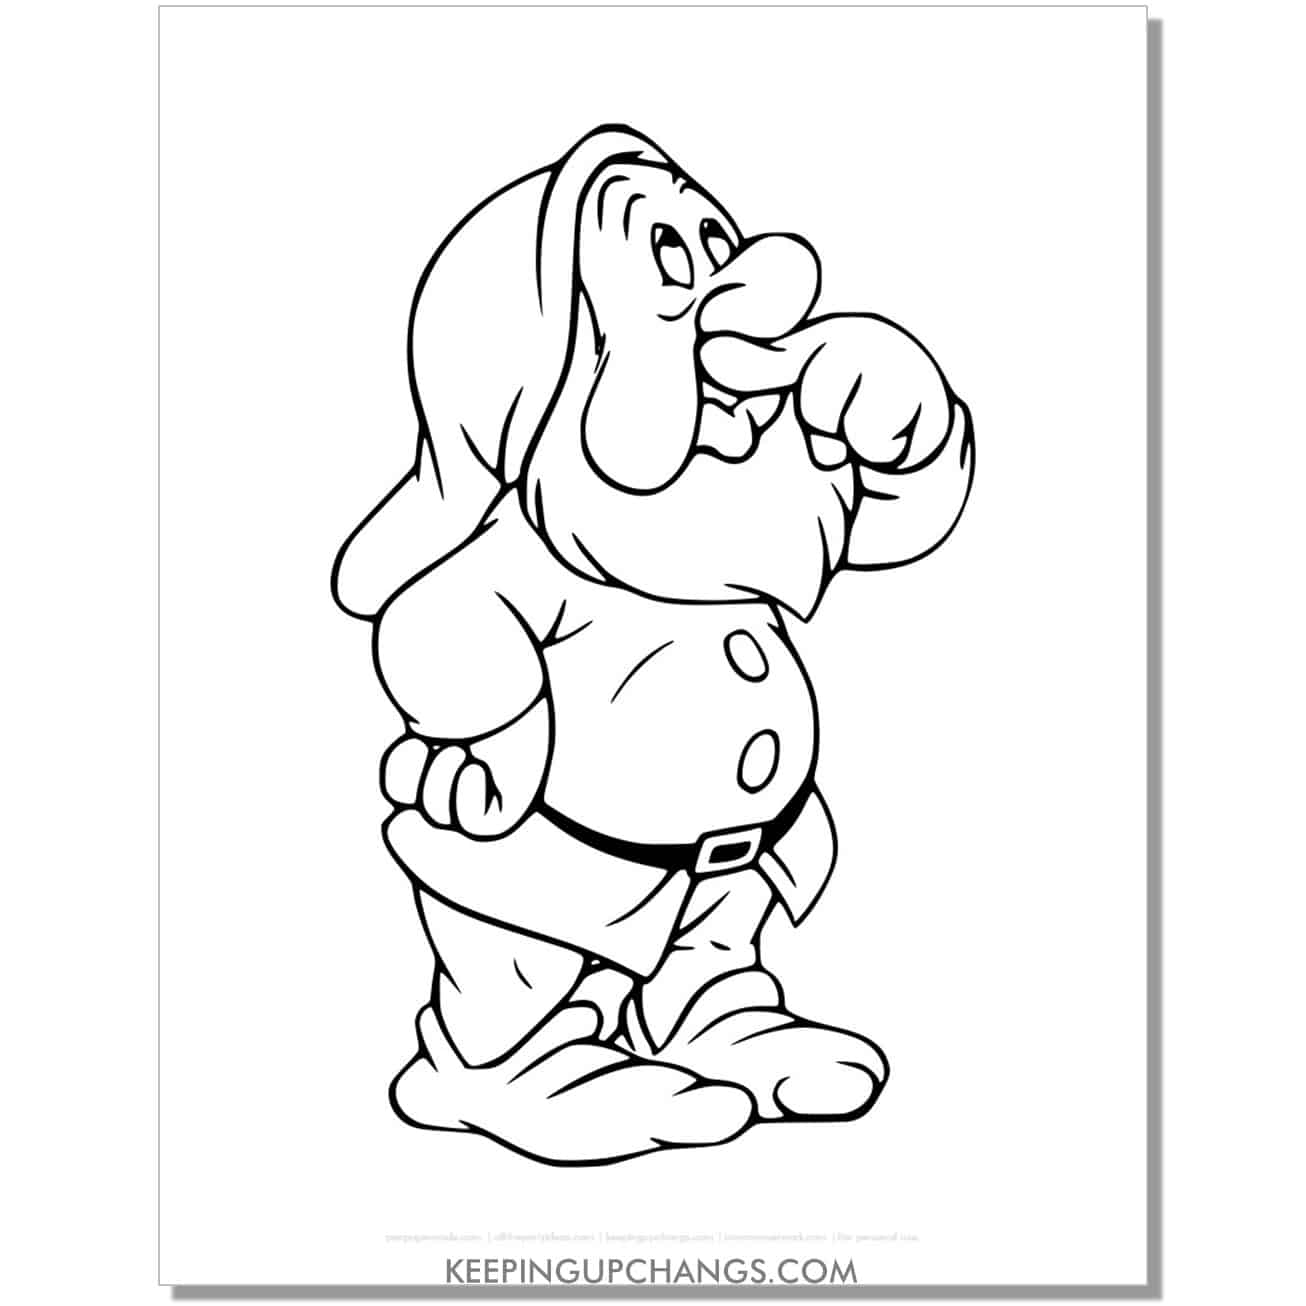 snow white dwarf sneezy with finger on nose coloring page, sheet.